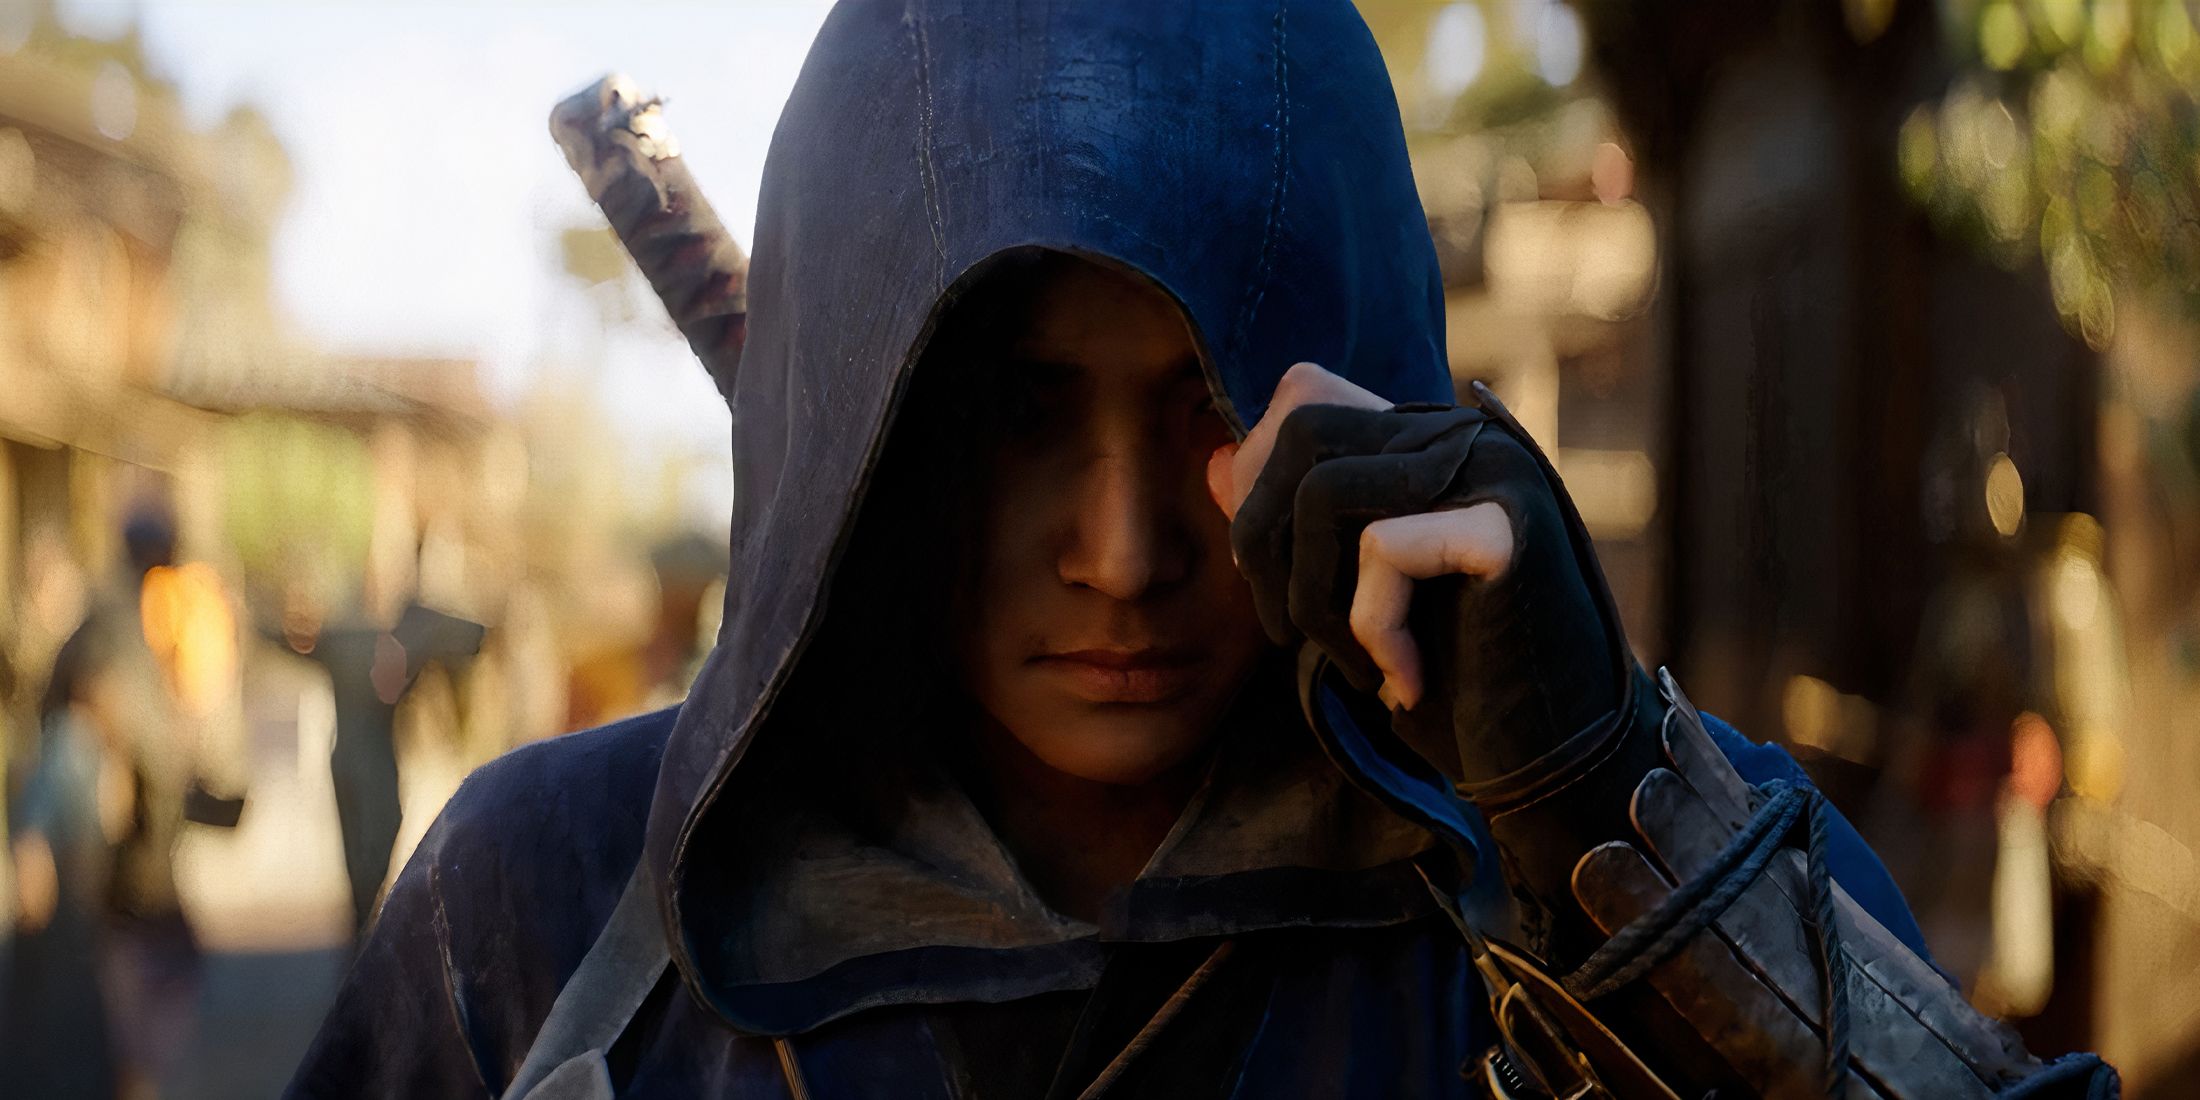 Assassin's Creed Shadows' Naoe putting on her hood